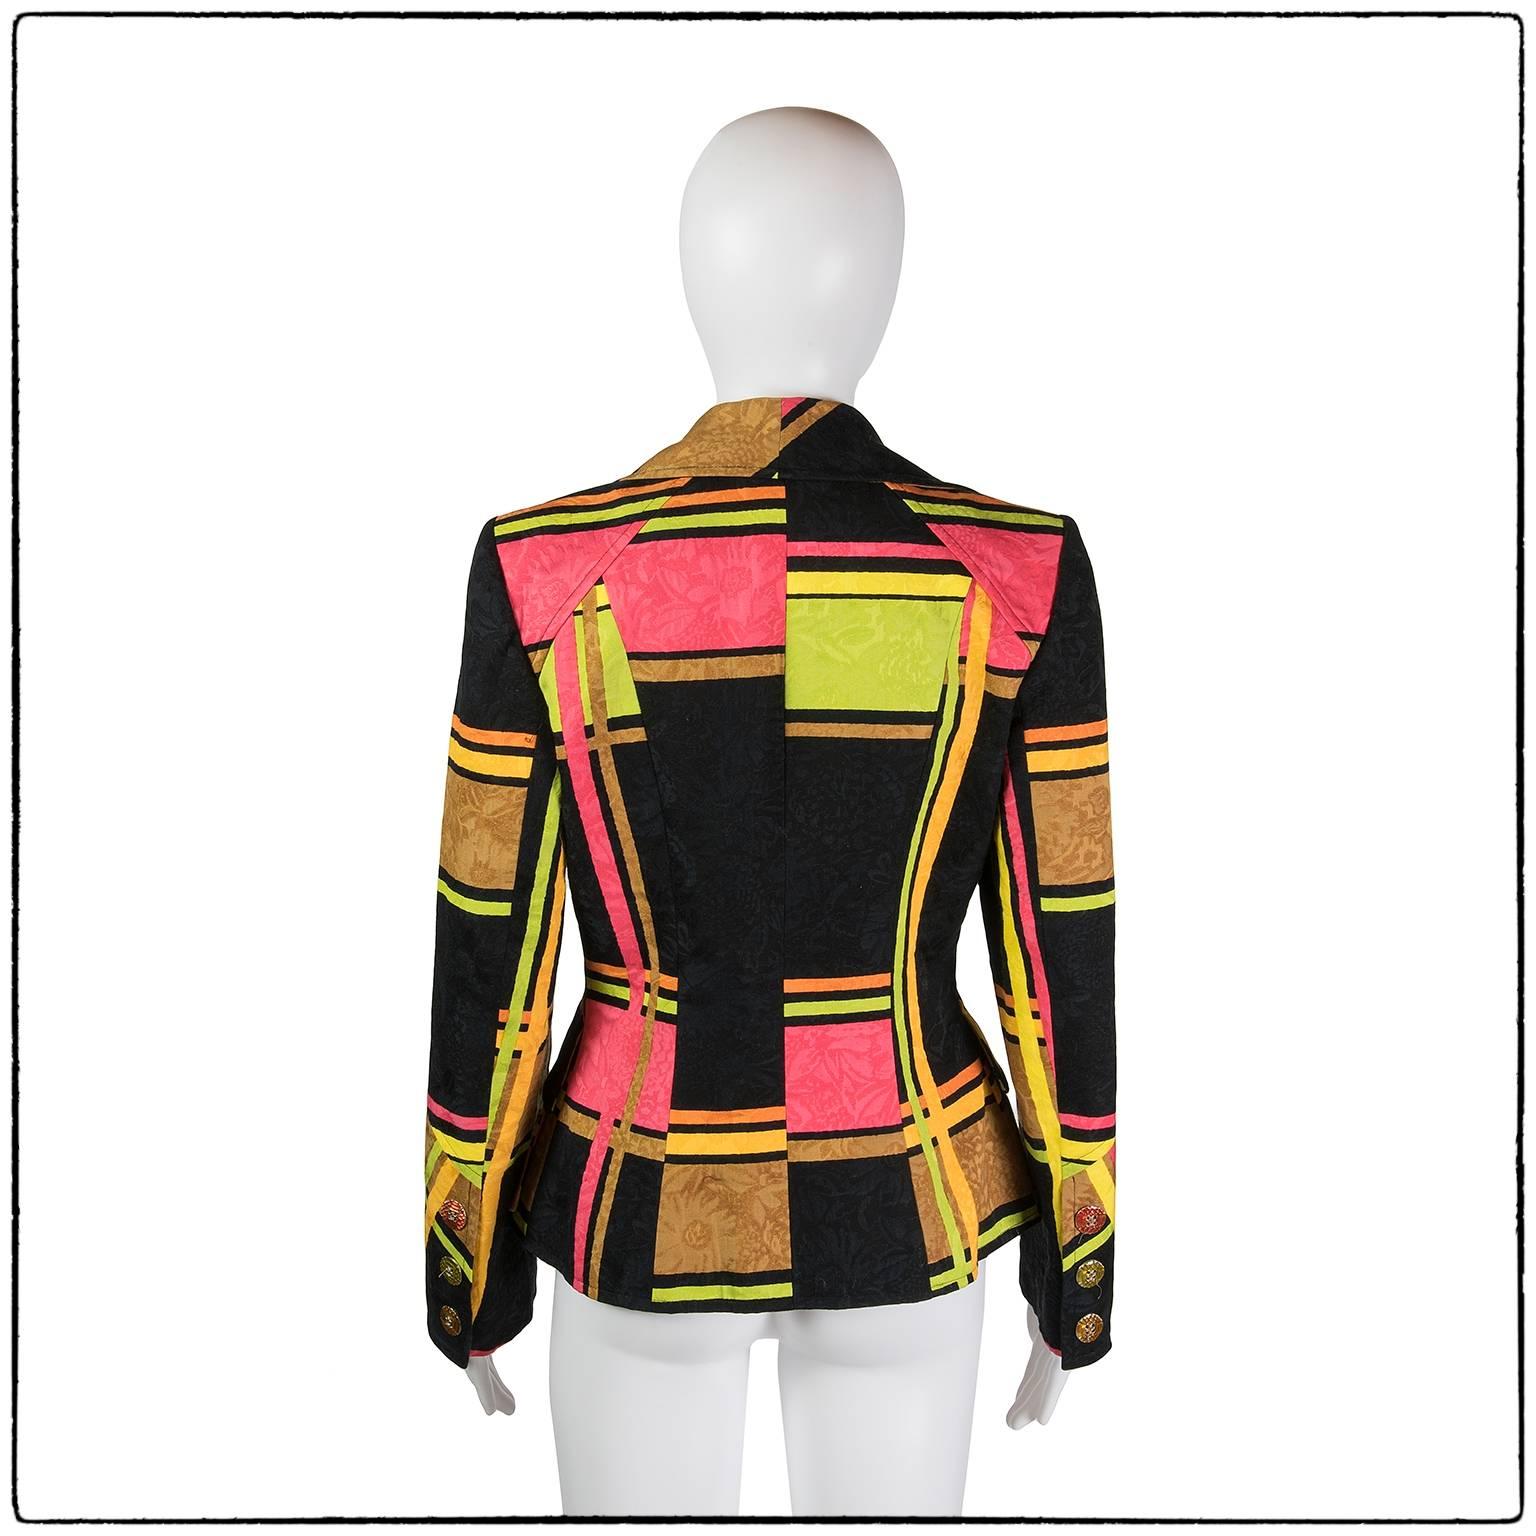 Fantastic Christian Lacroix multicoloured Jacket, circa 1990s
Vibrant Colors Pink, Green , yellow and bronze
Beautiful metal multicoloured buttons

Brand: Christian Lacroix

Size : 38 eu, 10 UK, 6 US

Material: 100% cotton
lining : silk and